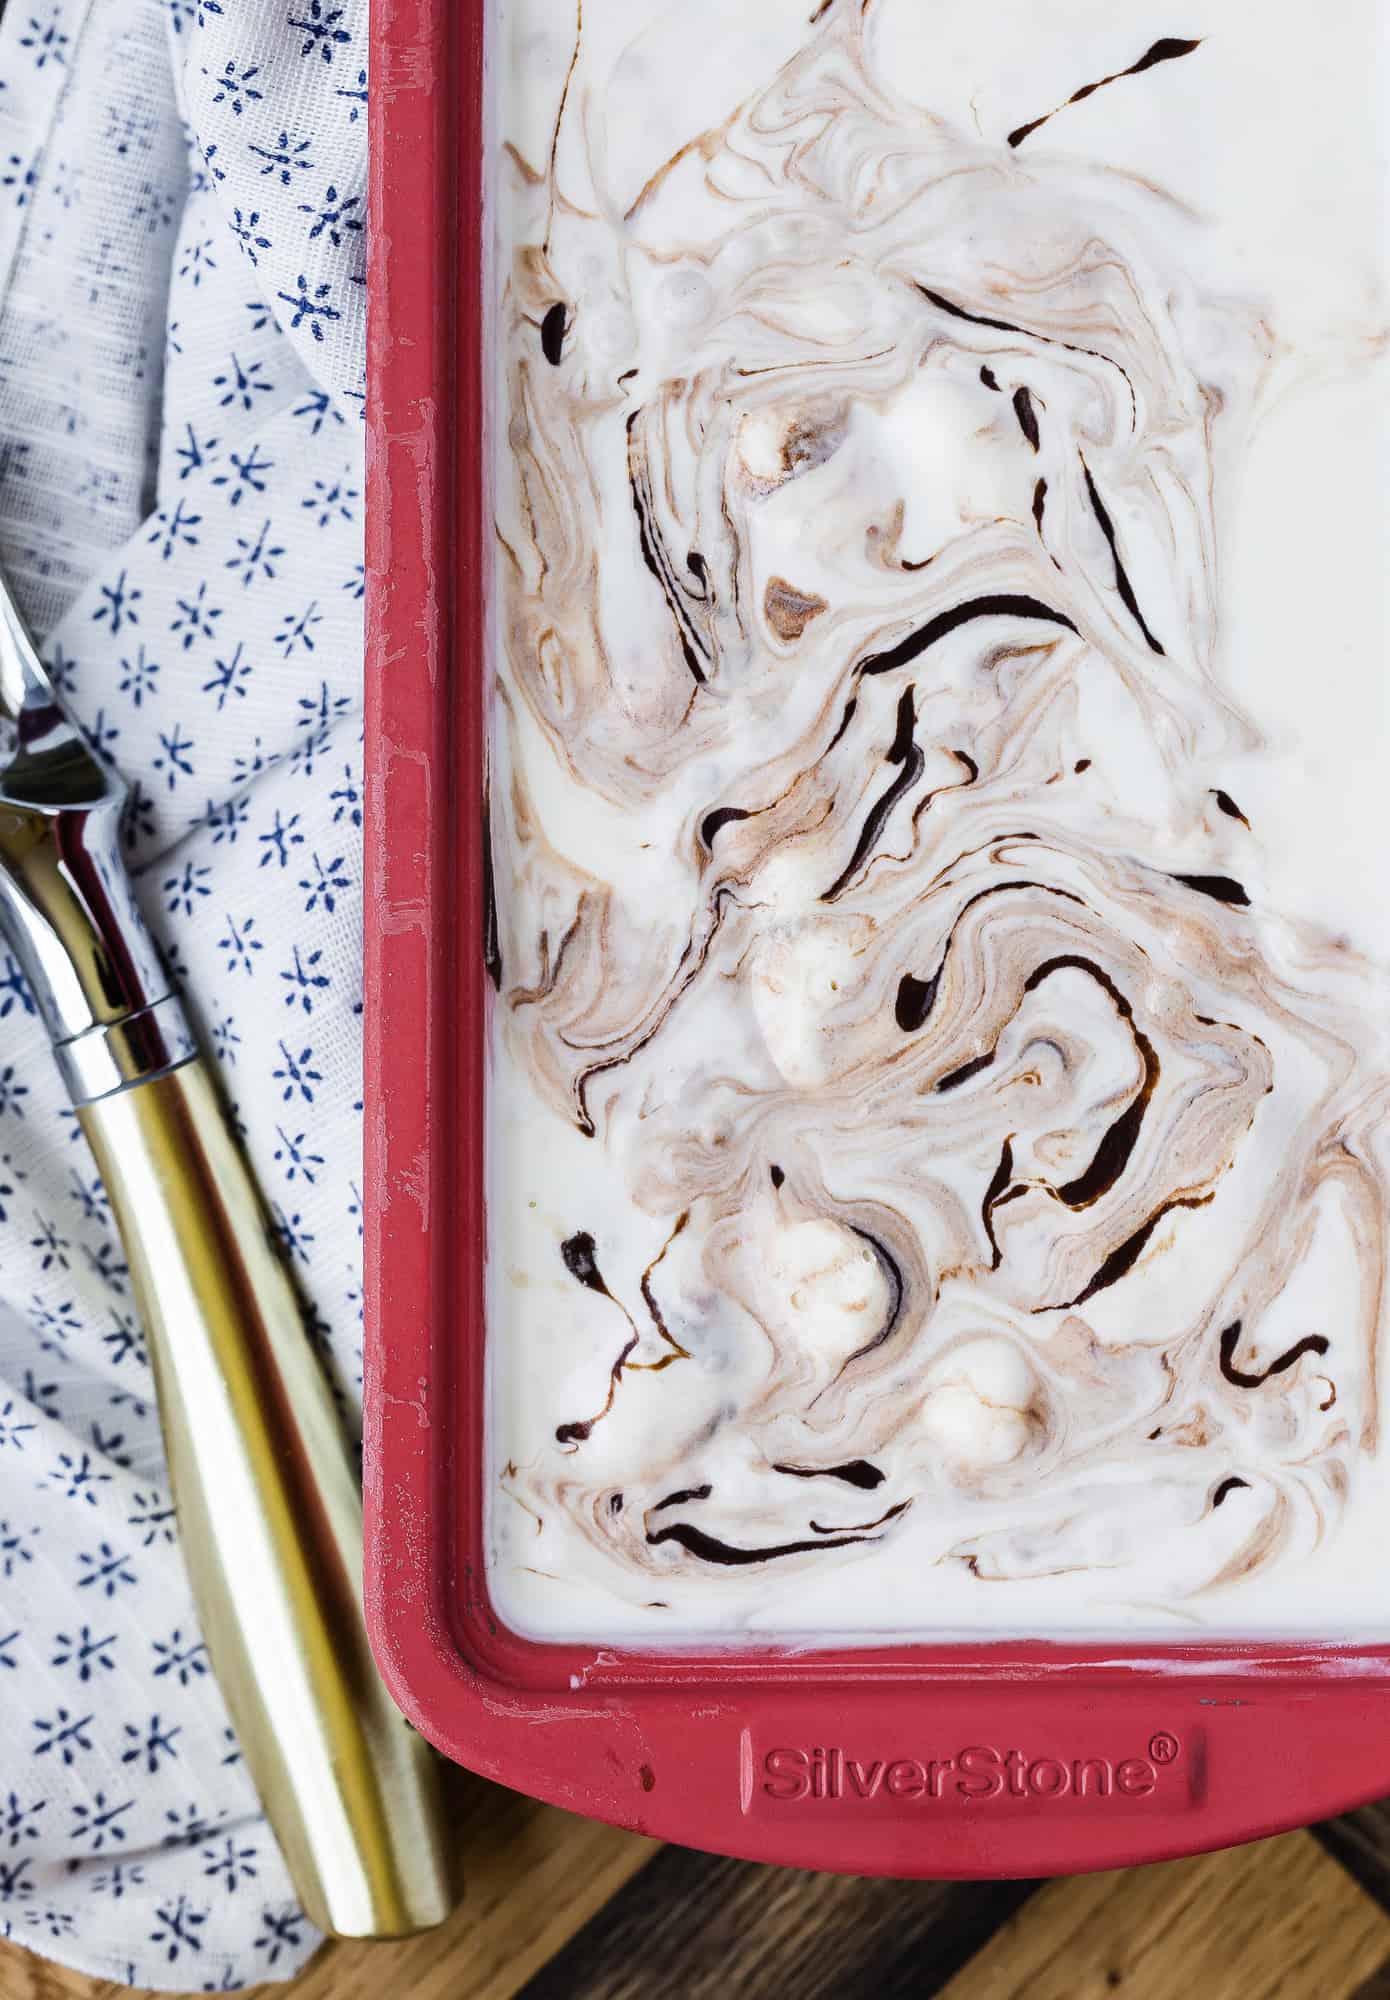 Fudge swirl ice cream in a red loaf pan.